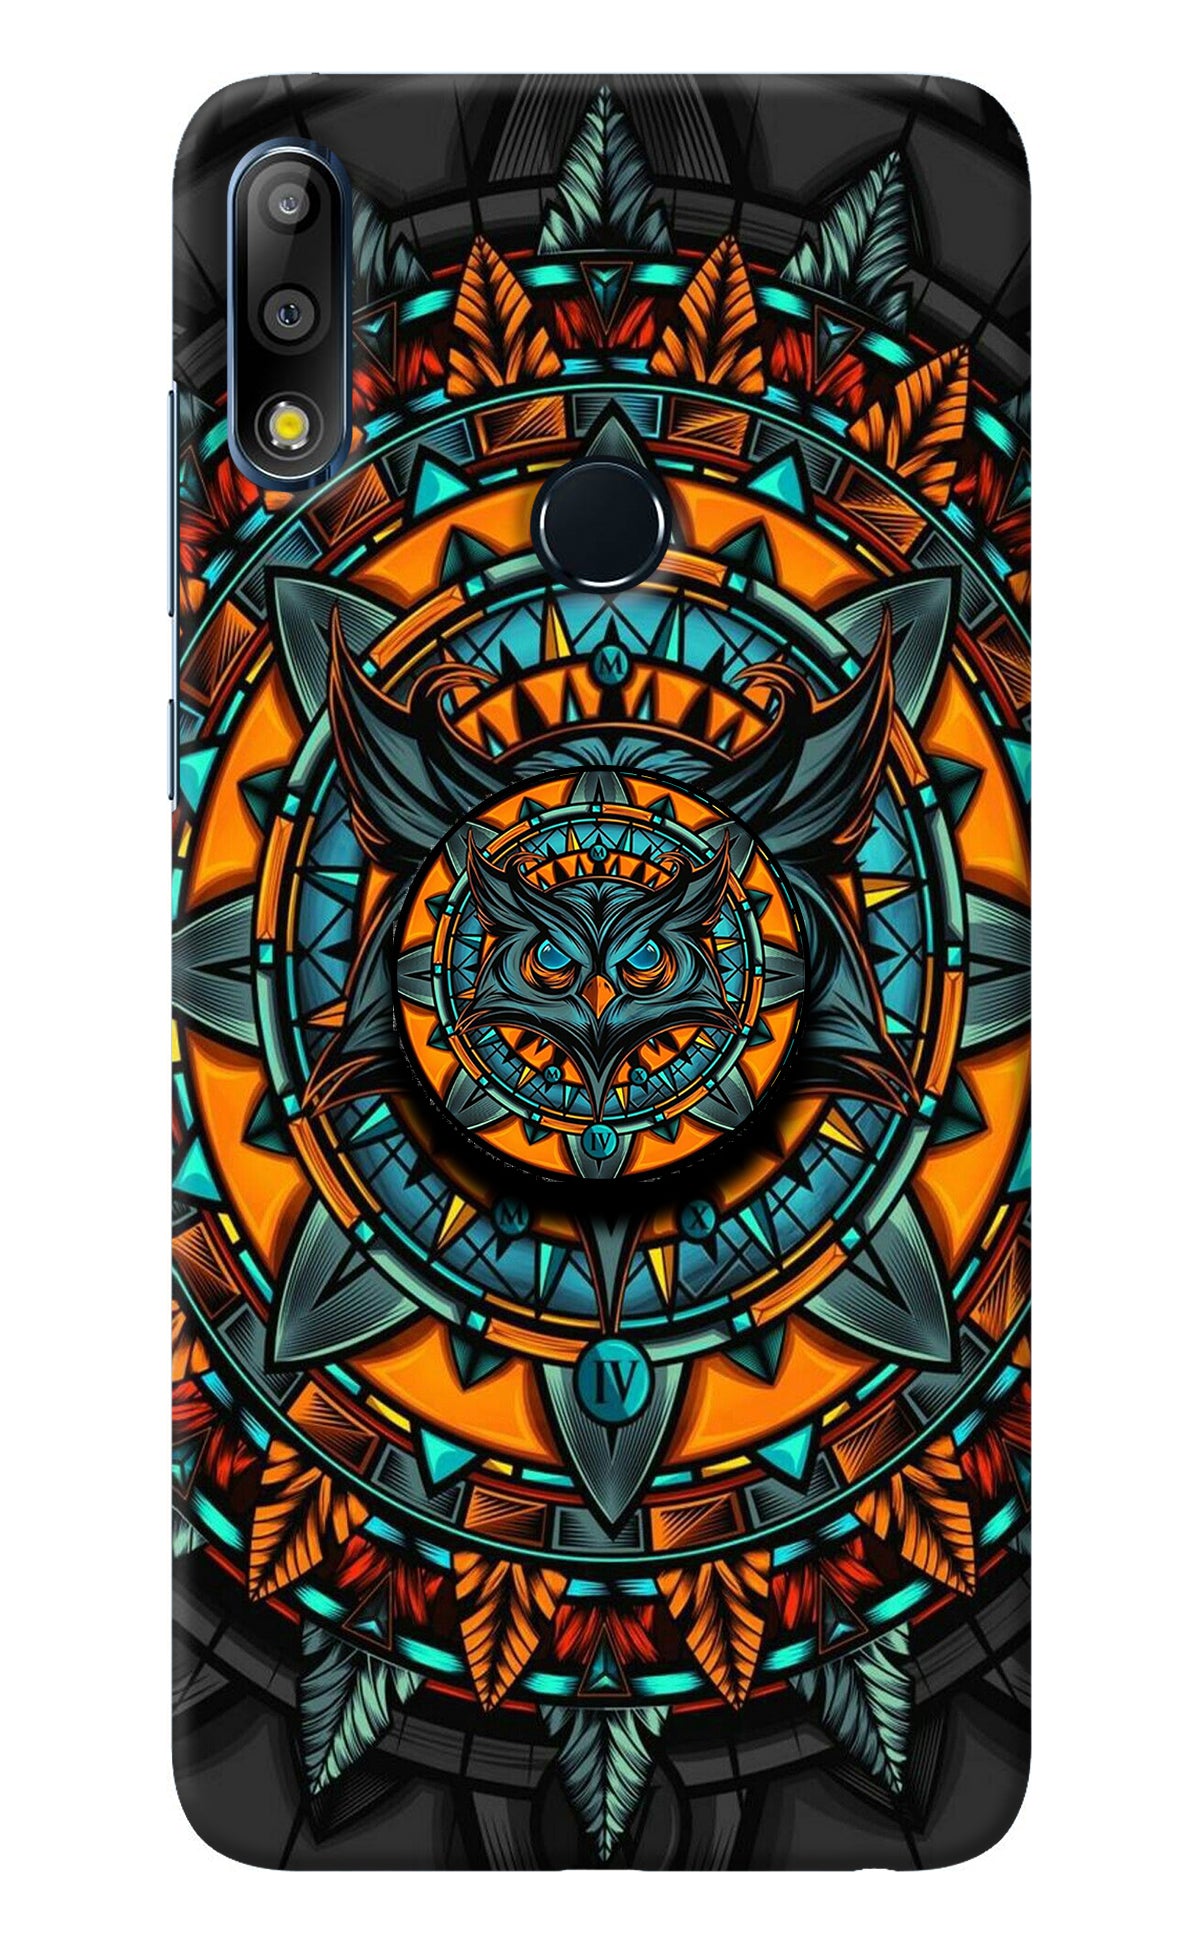 Angry Owl Asus Zenfone Max Pro M2 Pop Case